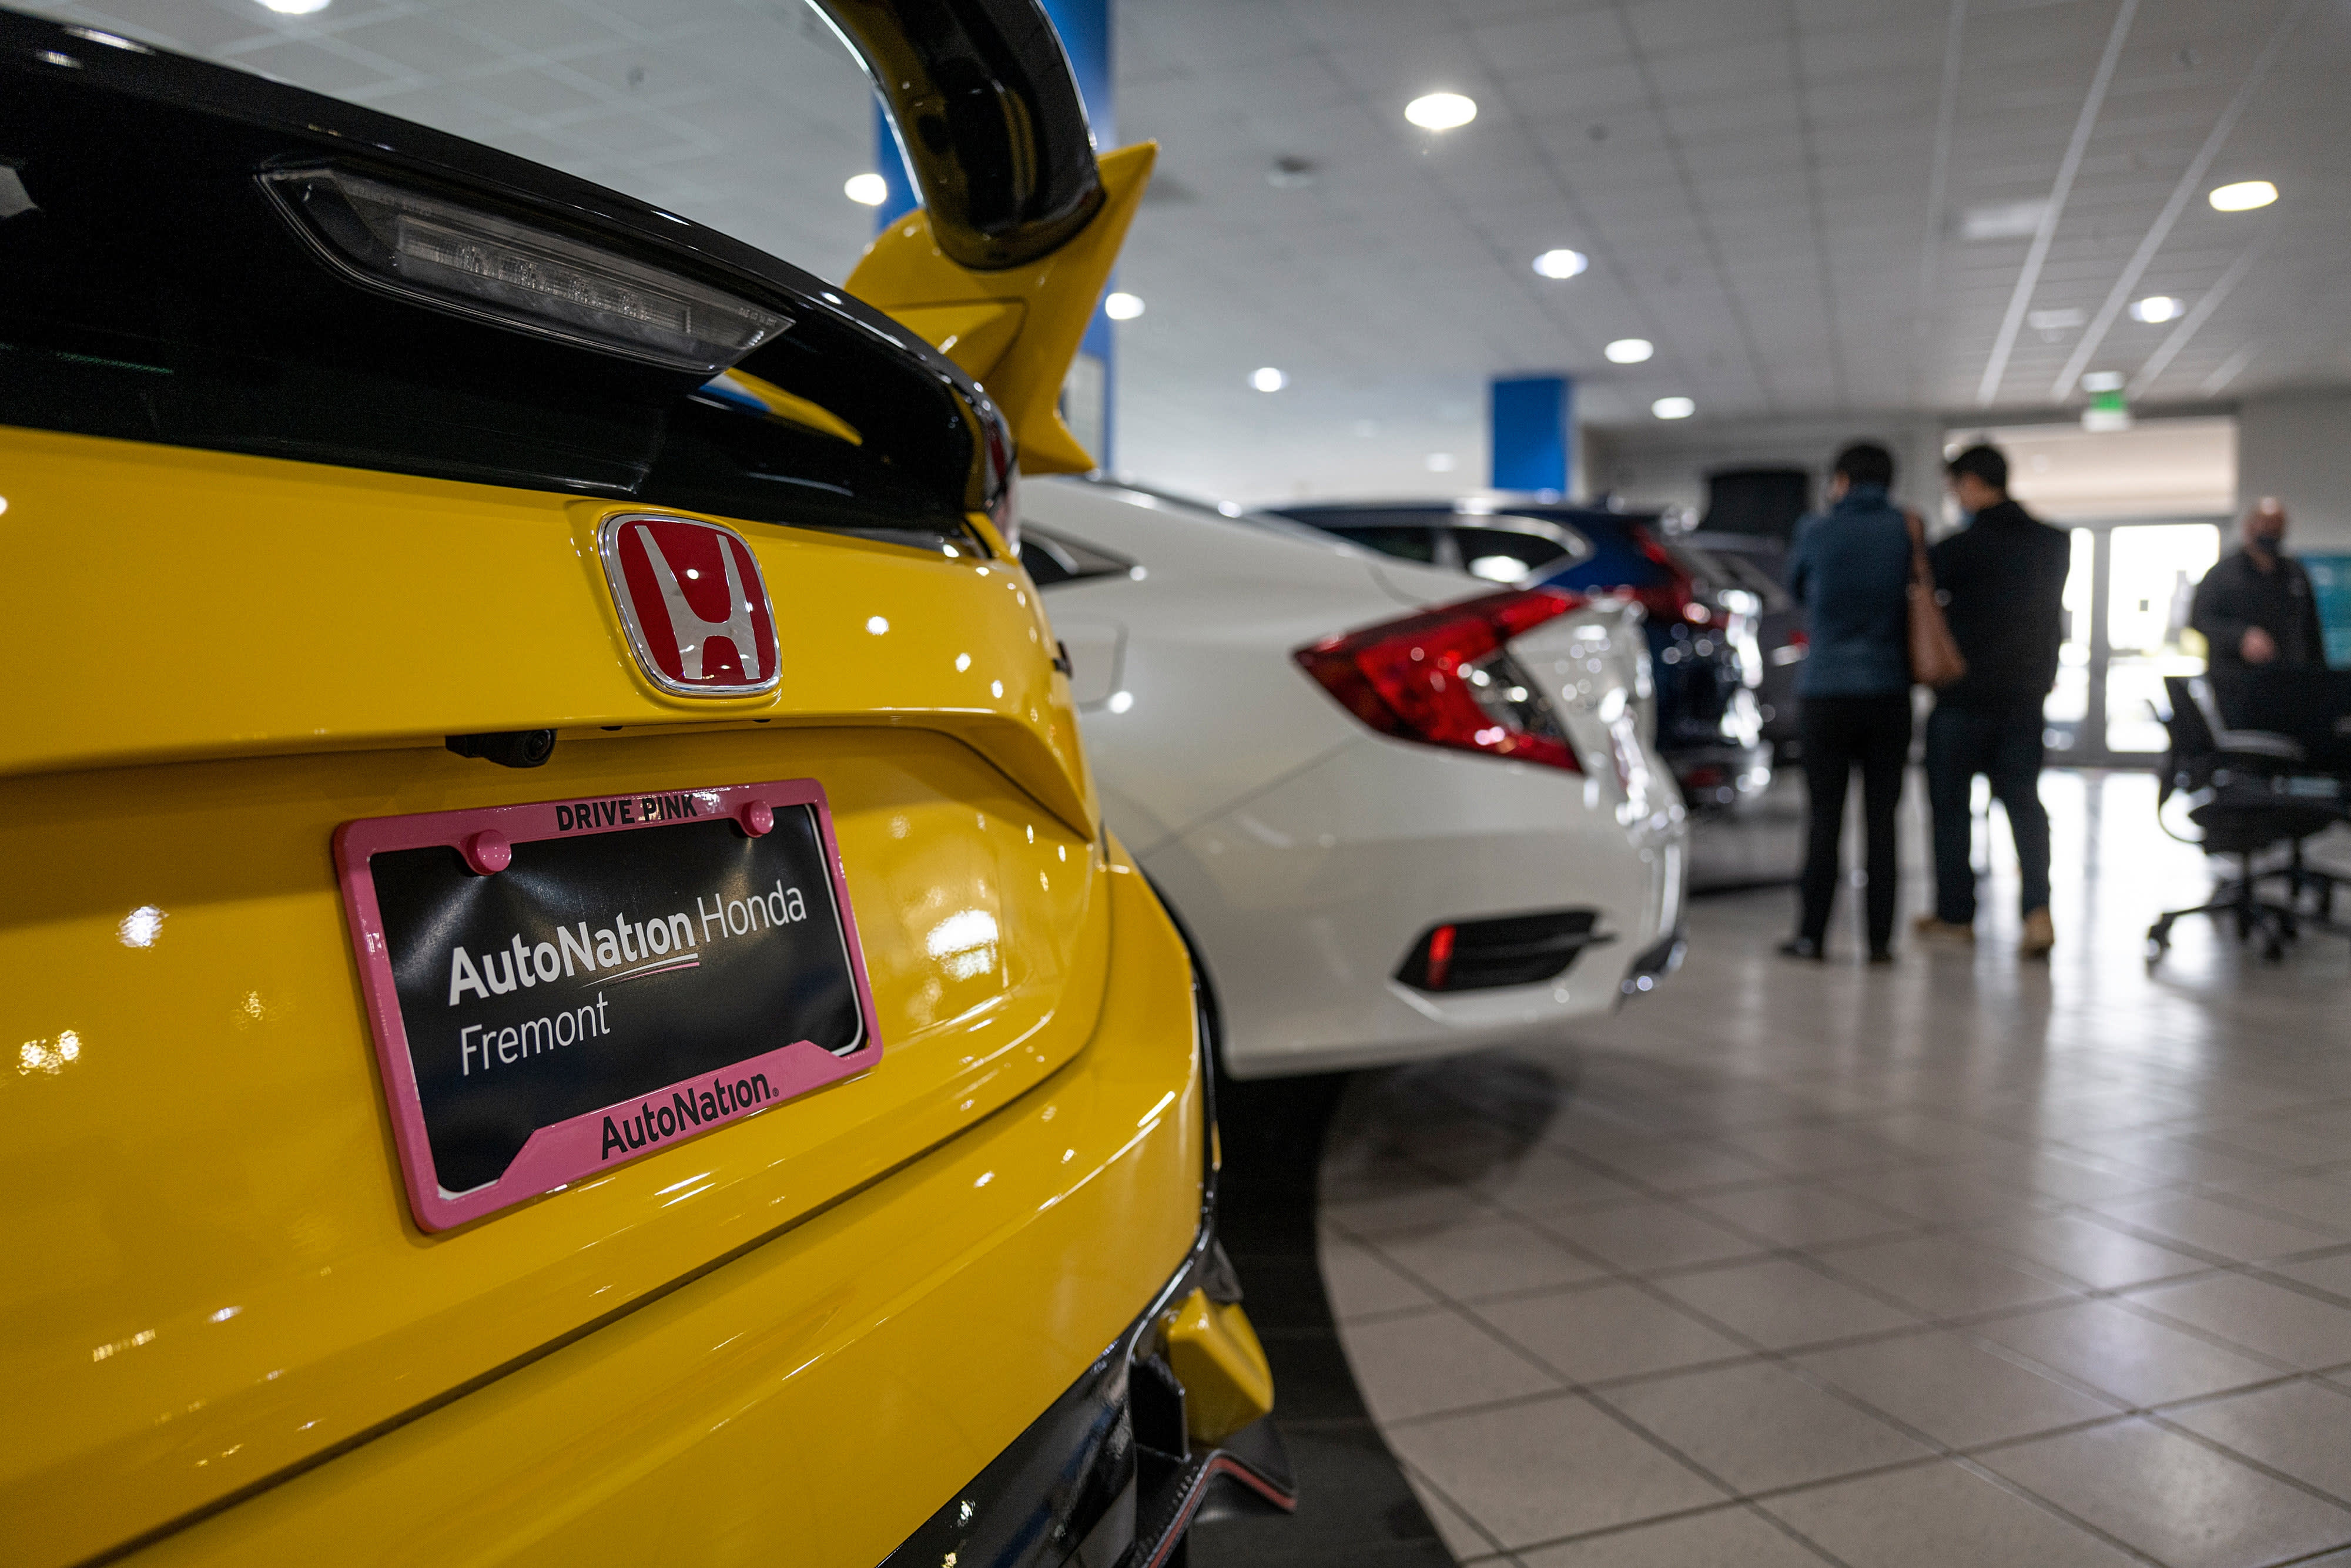 AutoNation shares hit new all-time high after company reports record quarterly earnings